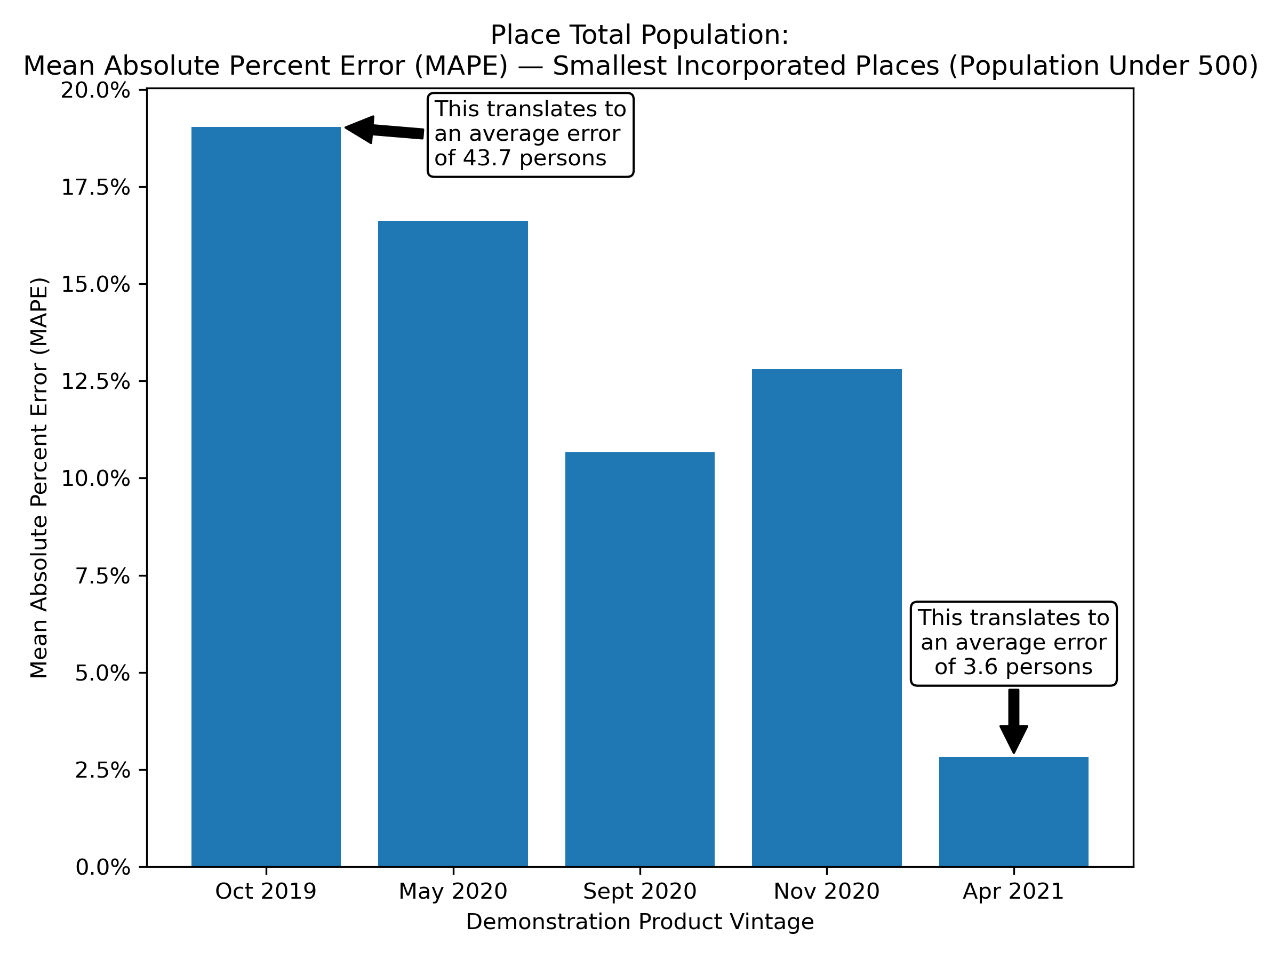 Total Population: Smallest Incorporated Places (Populations Under 500)